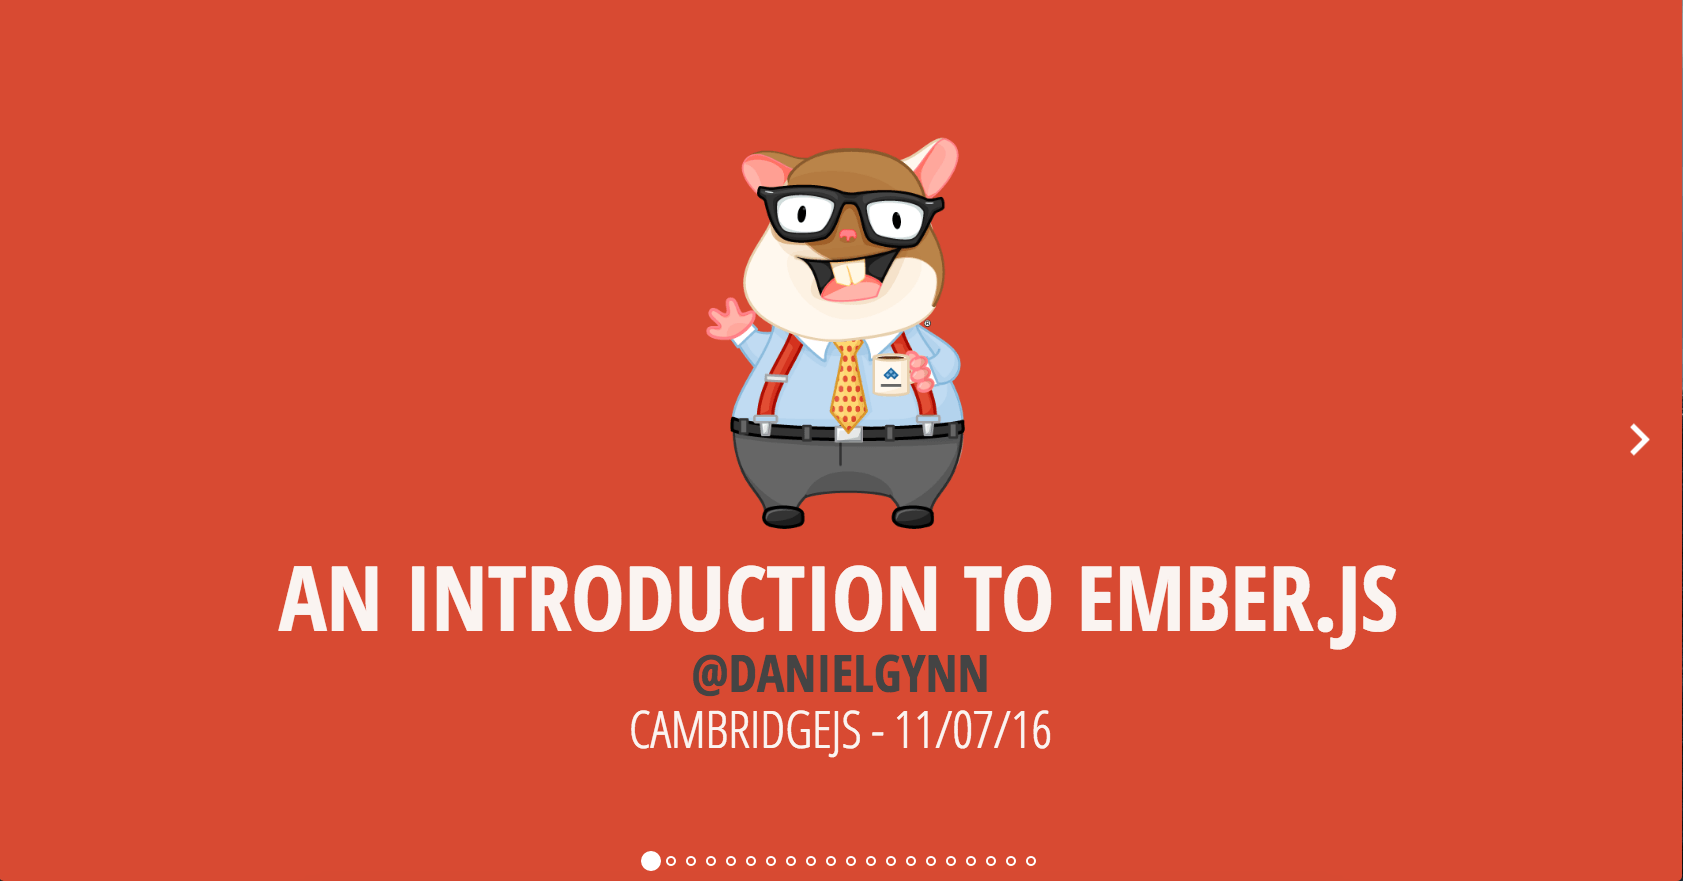 Ember.js Logo - Repositive Ambitious Web Applications with Ember.js